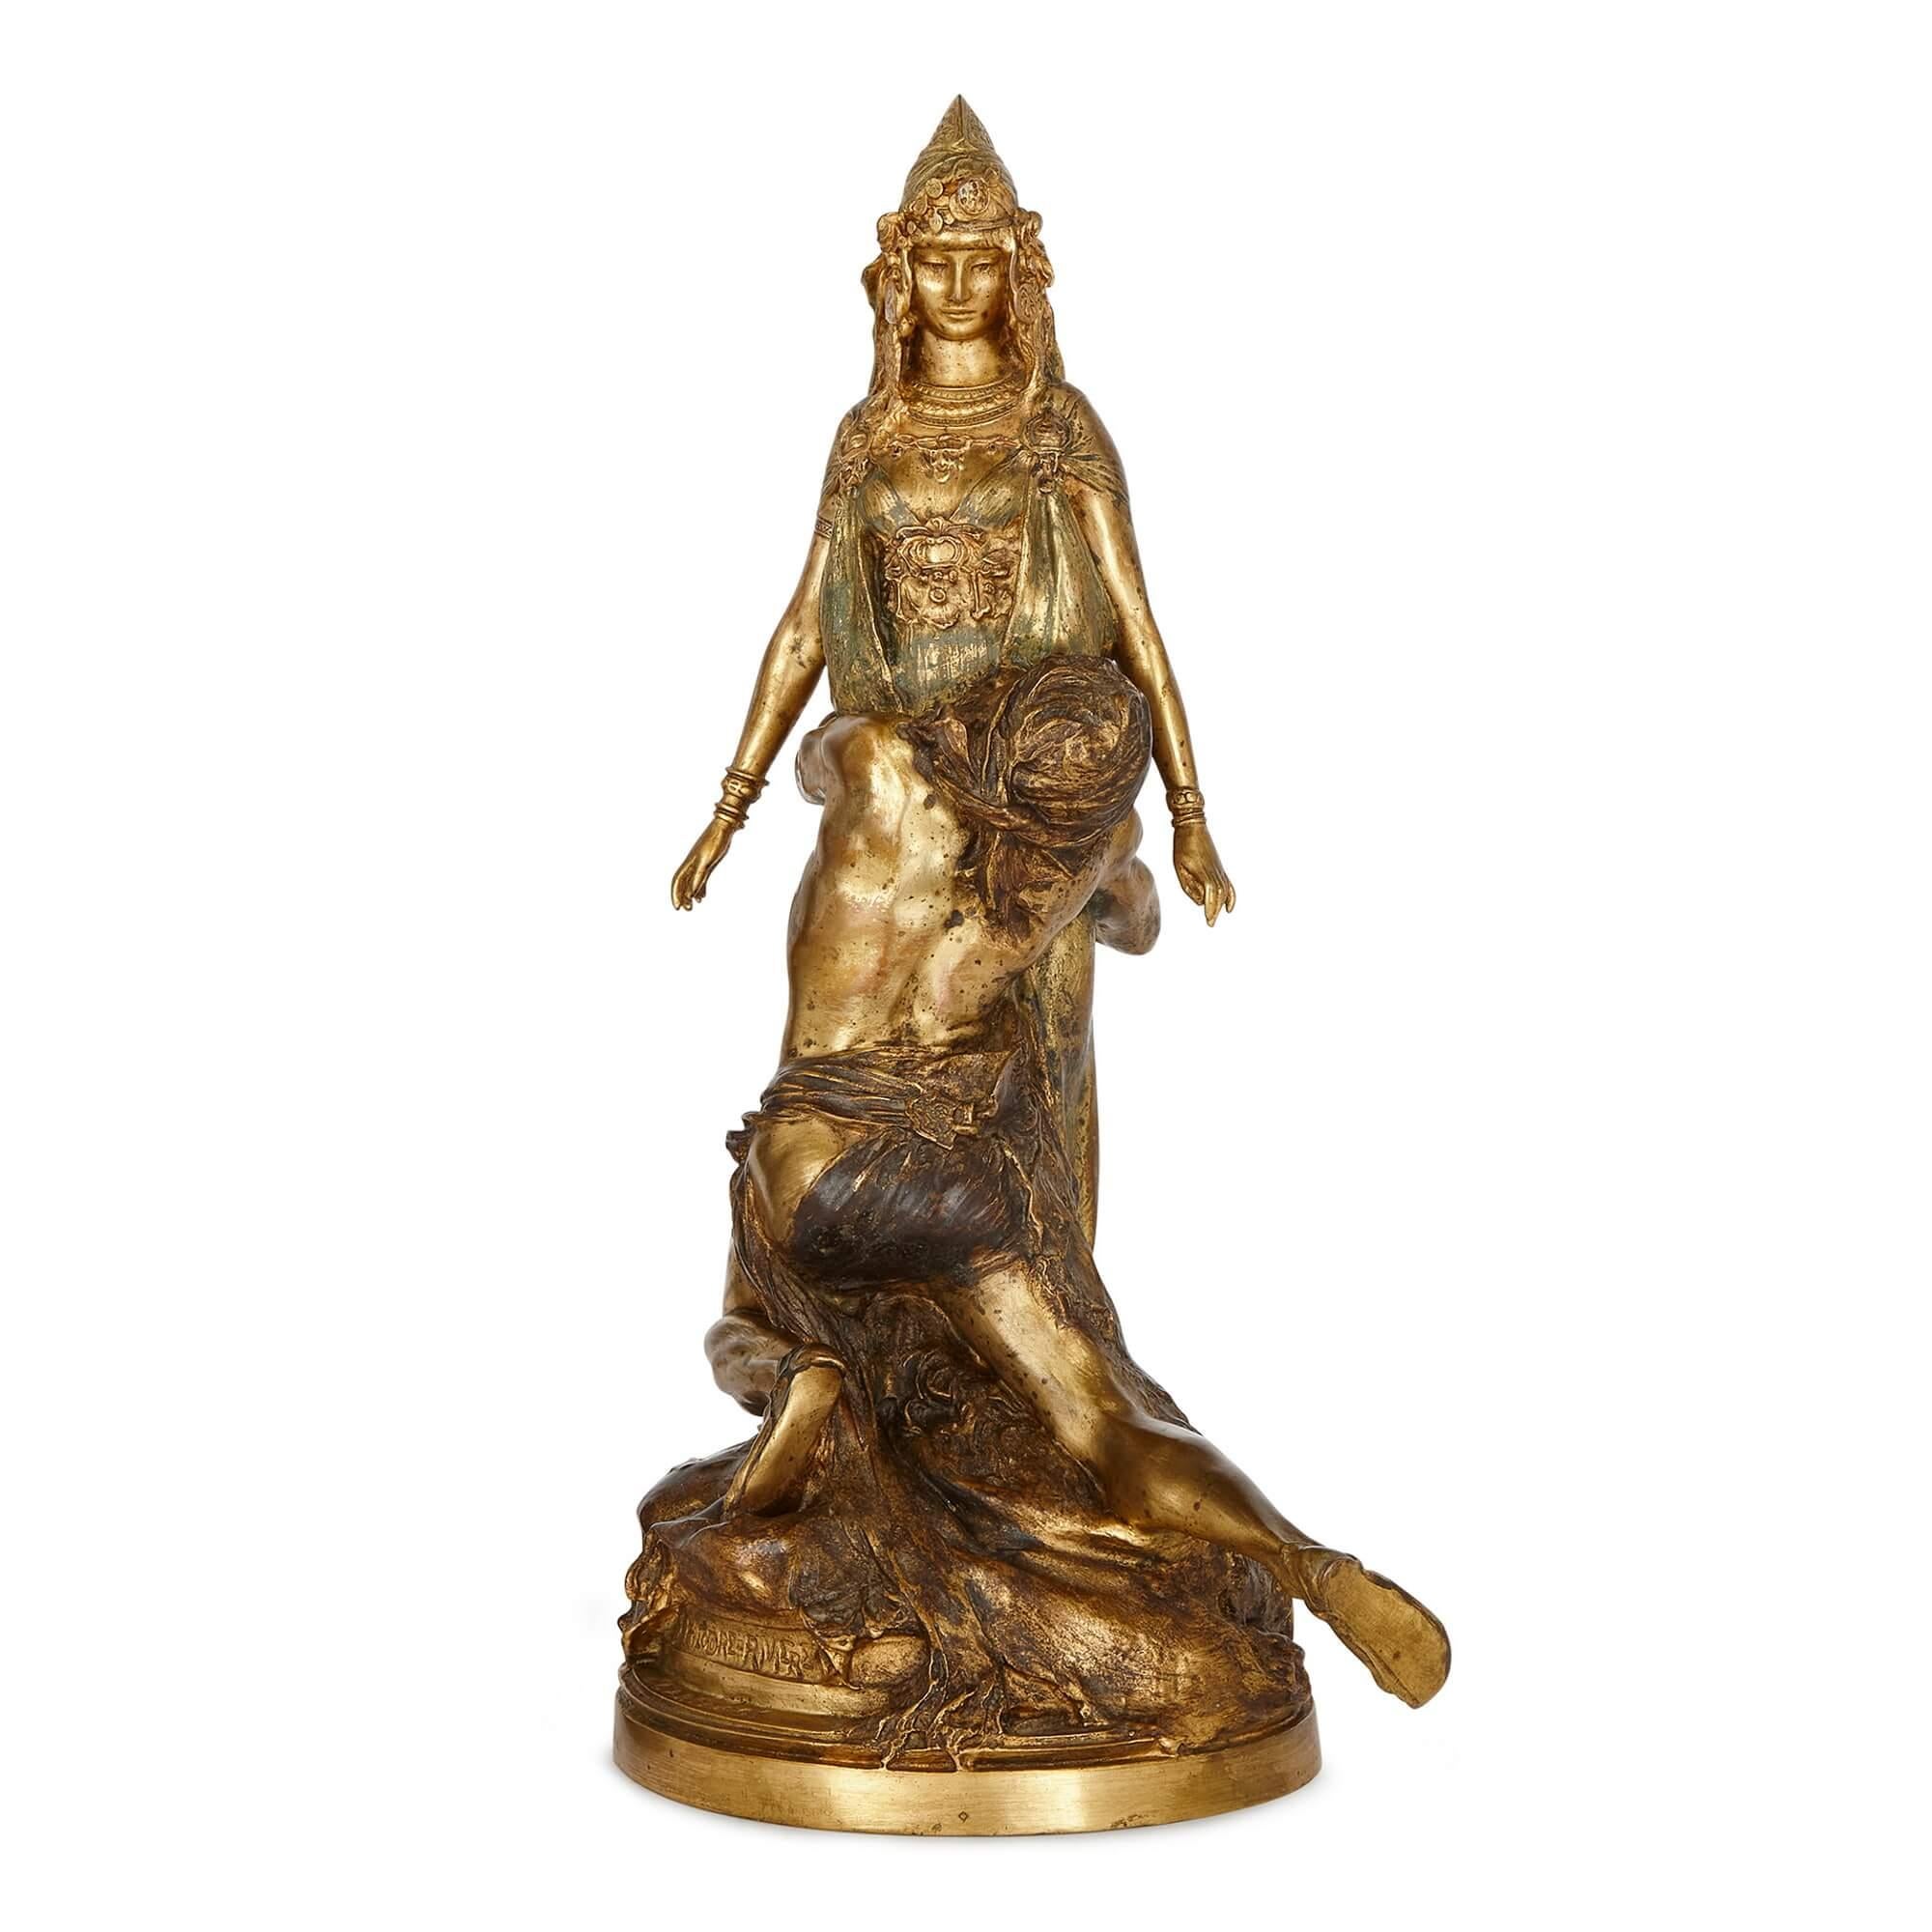 A lost-wax bronze sculpture by Théodore Rivière, titled 'Carthage'
French, Late 19th Century
Height 41cm, width 23cm, depth 18cm

This superb lost-wax bronze sculpture is by Théodore Rivière, and was cast by the Susse Freres foundry in Paris